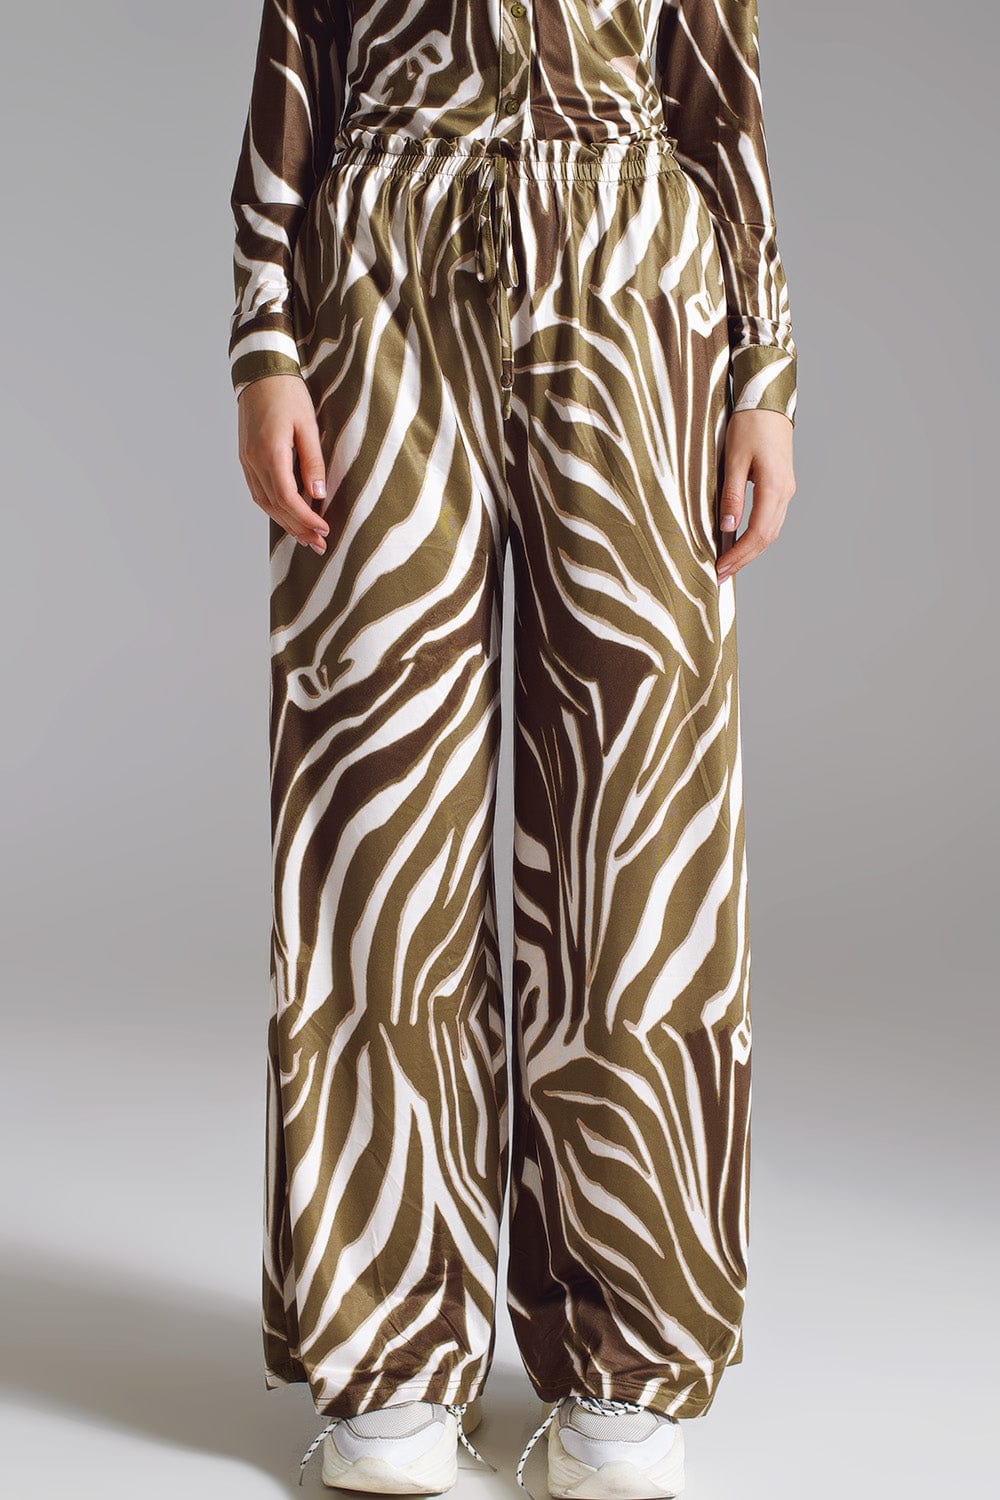 Topshop Slouchy Zebra Print Trousers | Nordstrom